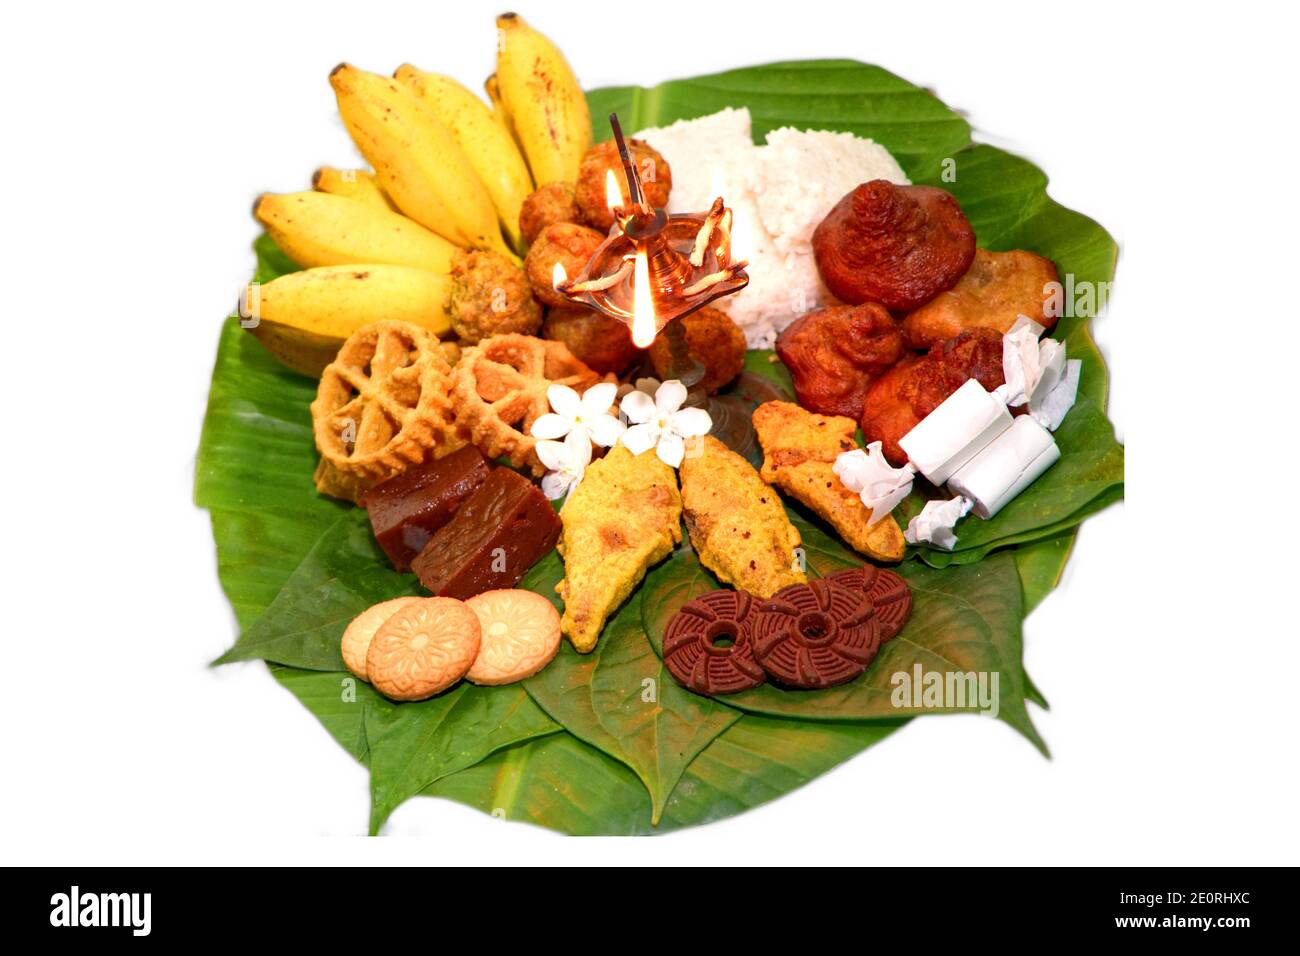 Sinhala Tamil New Year Traditional Foods with Oil lamp. Stock Photo